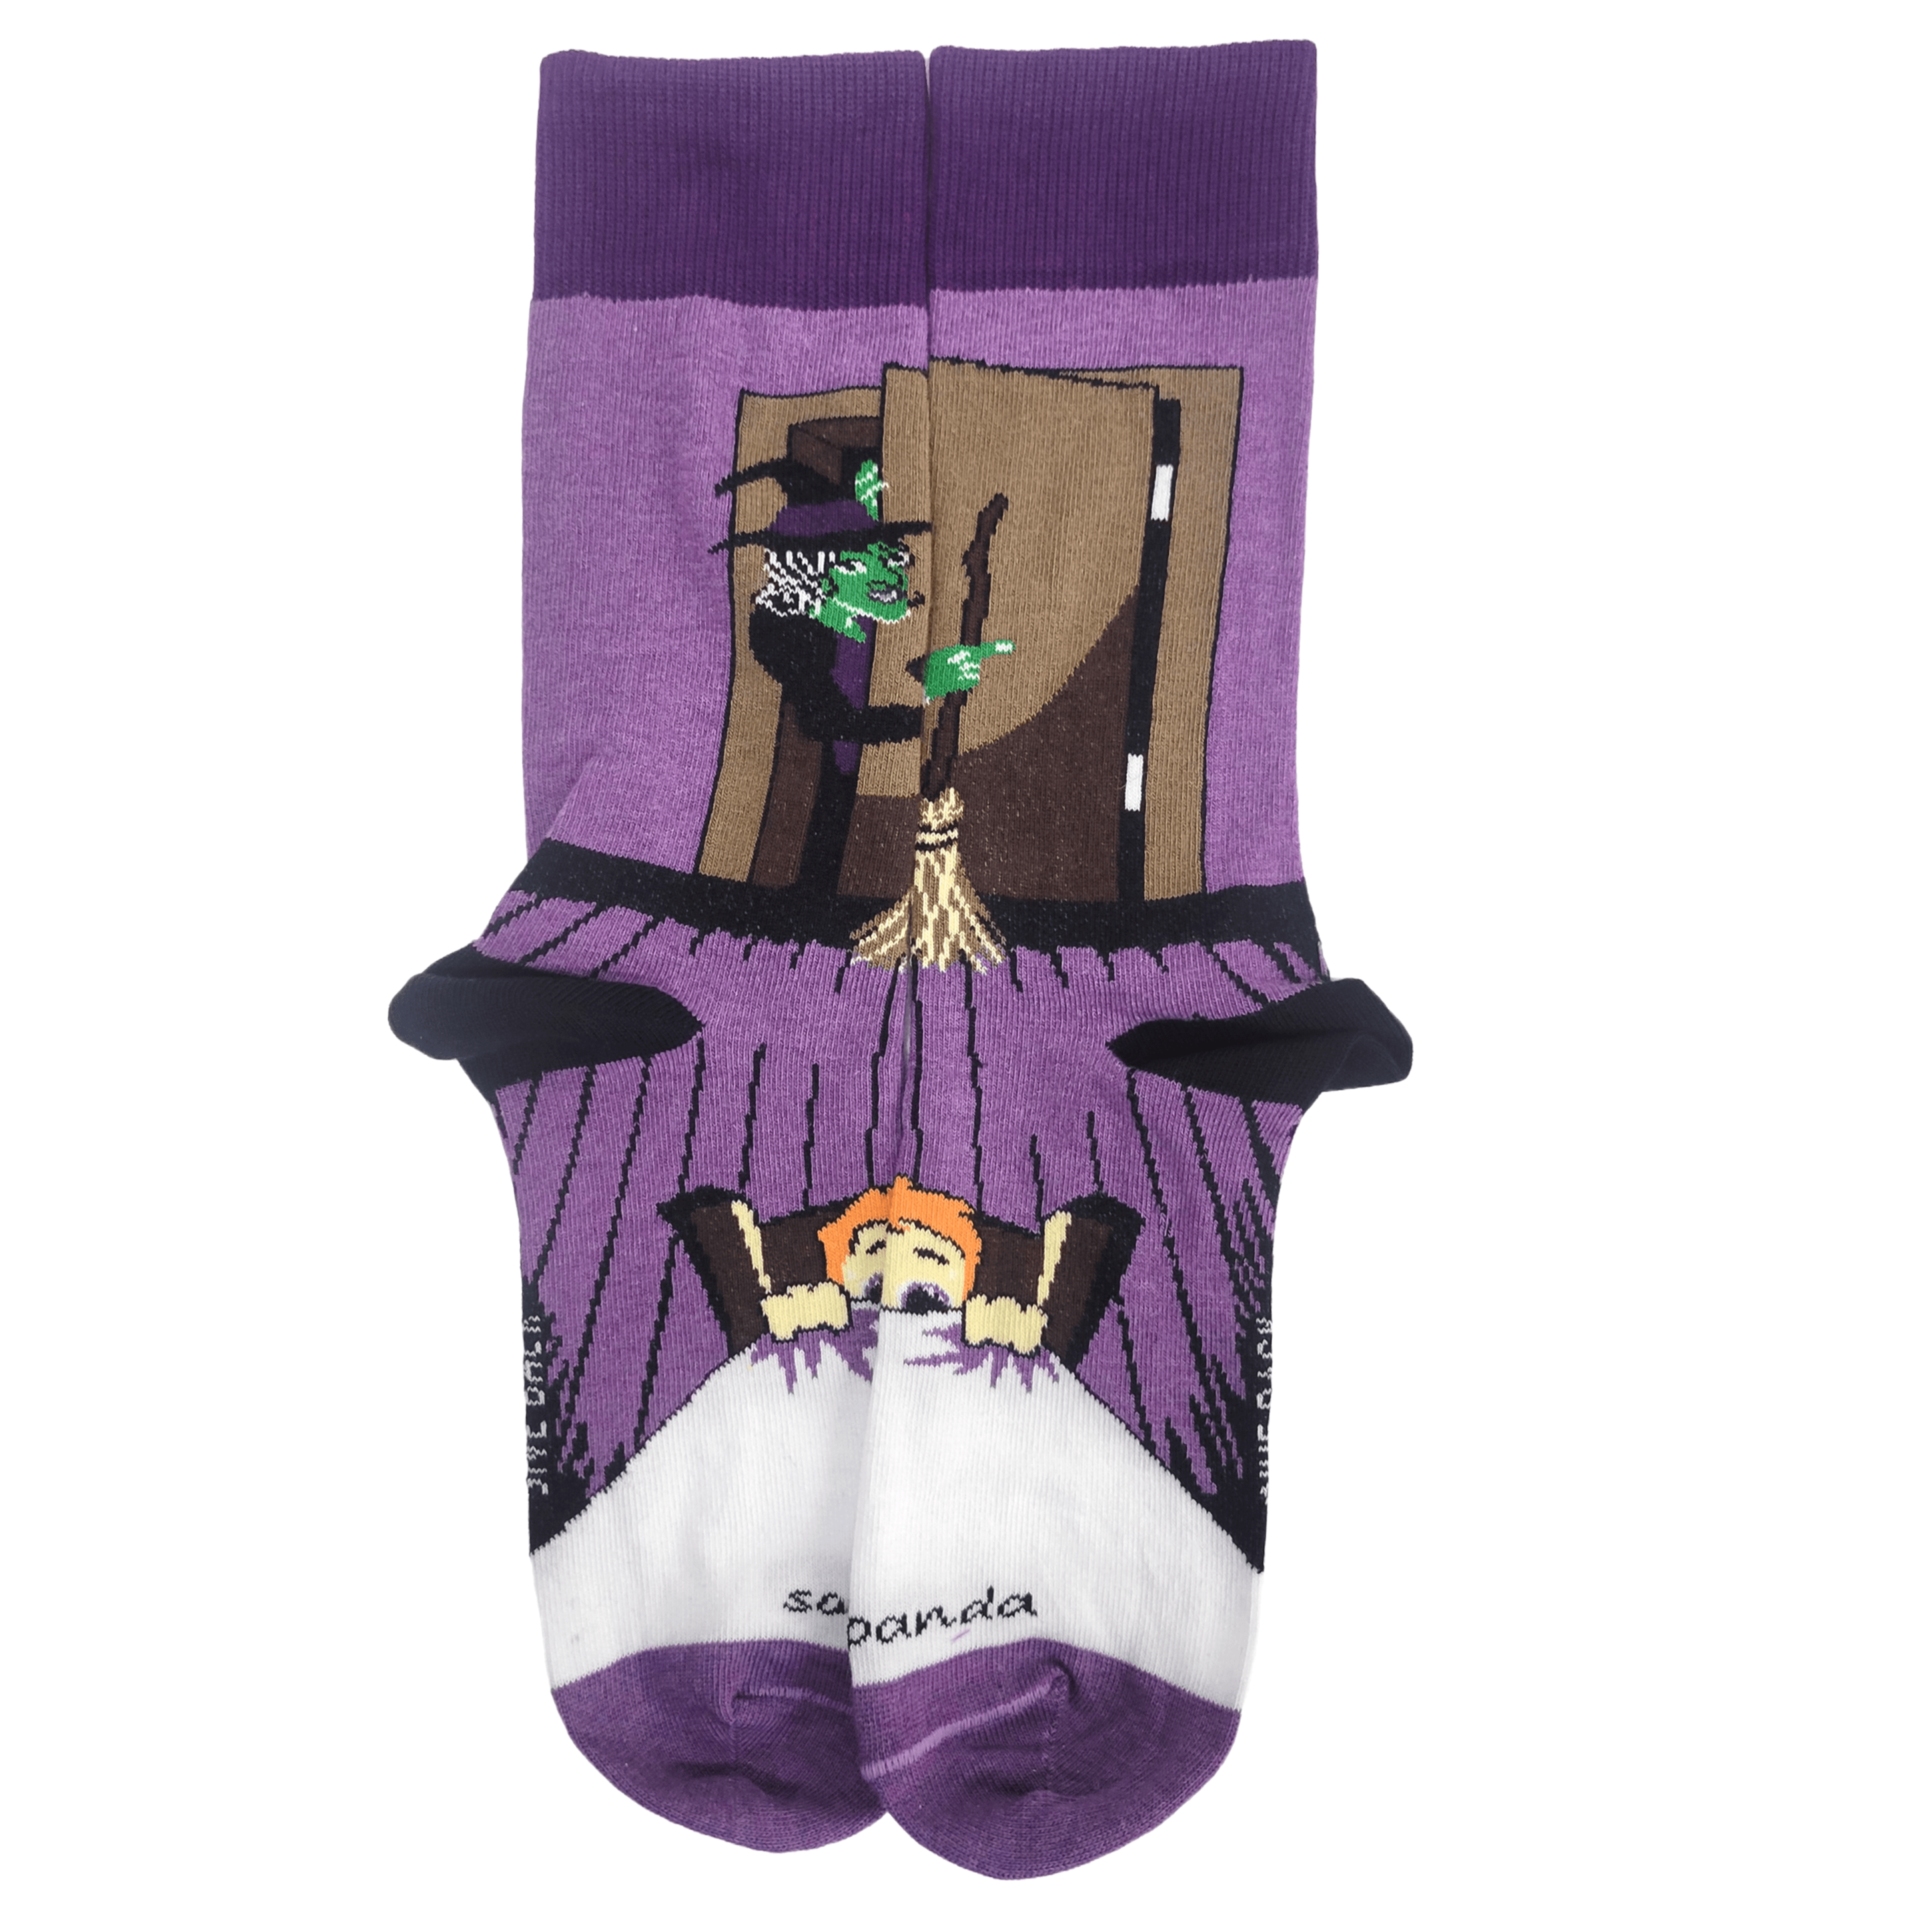 Nightmare Witch in the Closet Socks from the Sock Panda (Adult Medium)